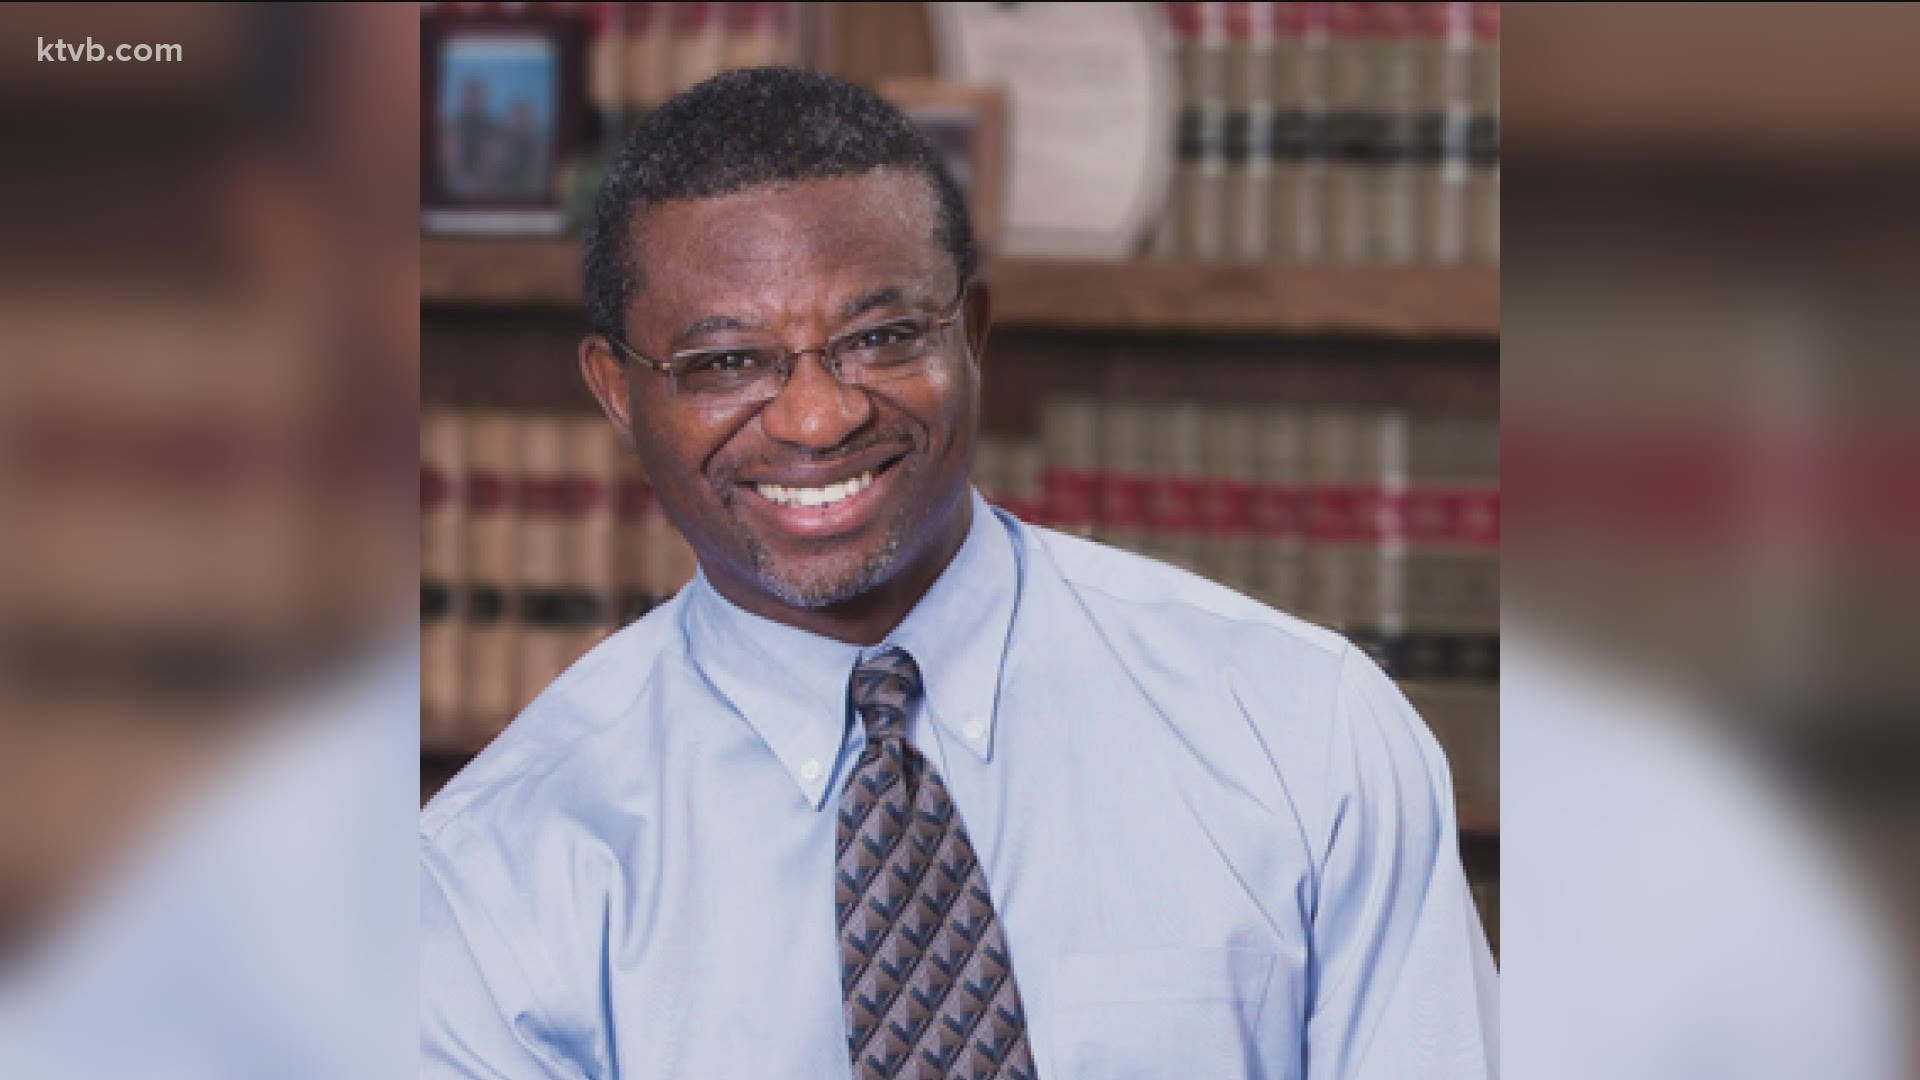 Originally from Lagos, Nigeria, he serves as a judge in canyon county and has a diverse law background  in Idaho.